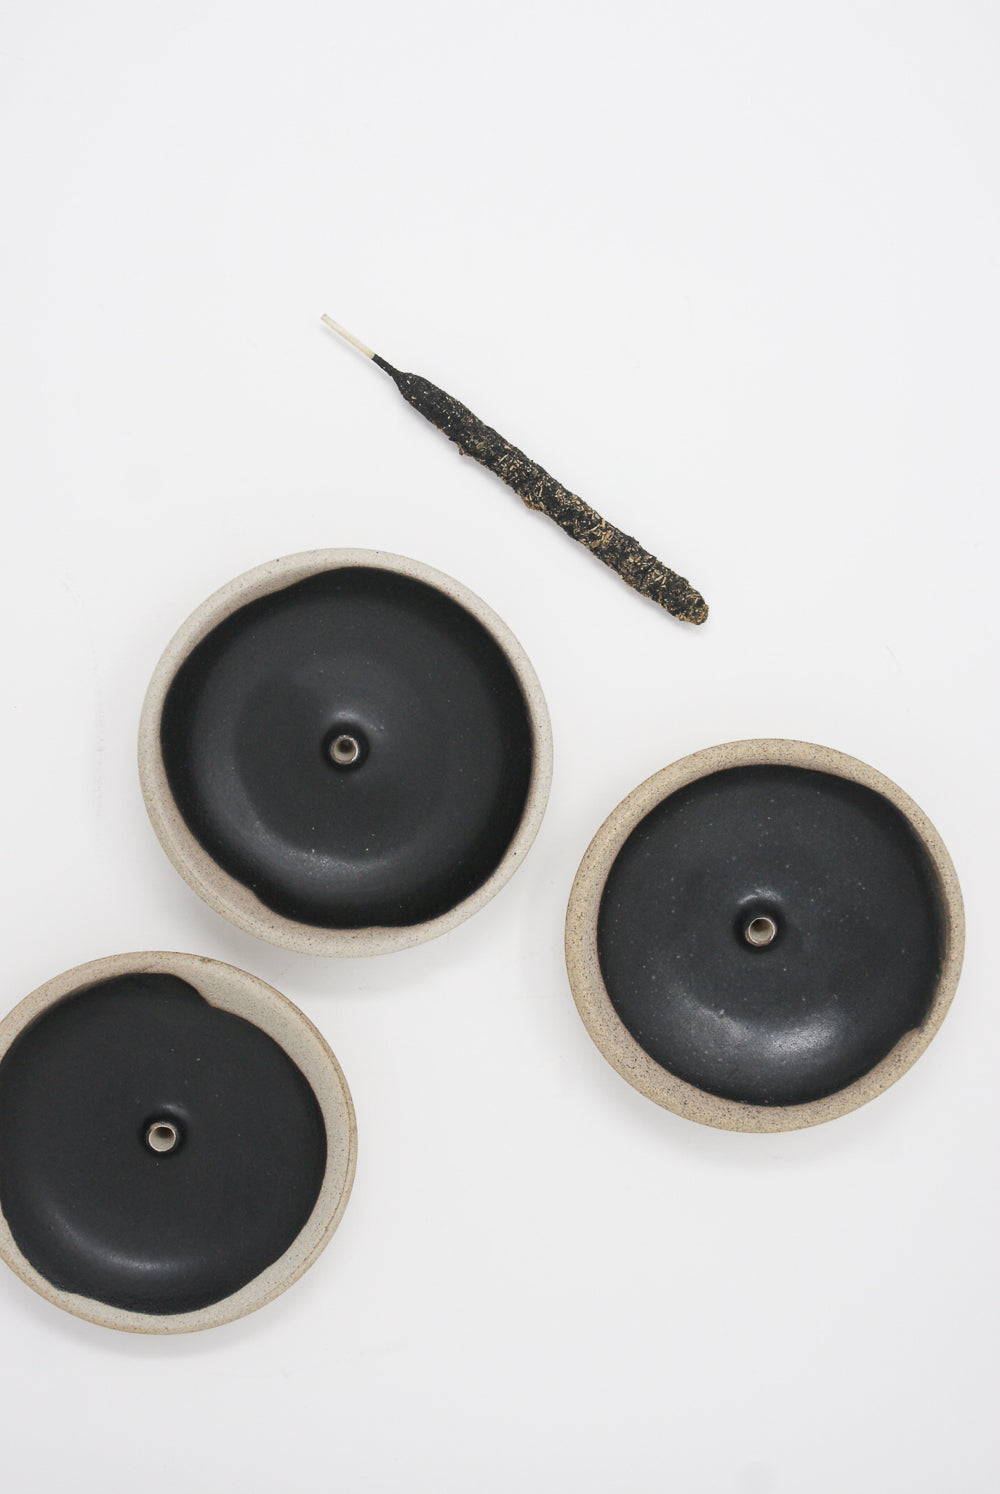 Incausa - Stoneware Incense Holder in Black group view with incense